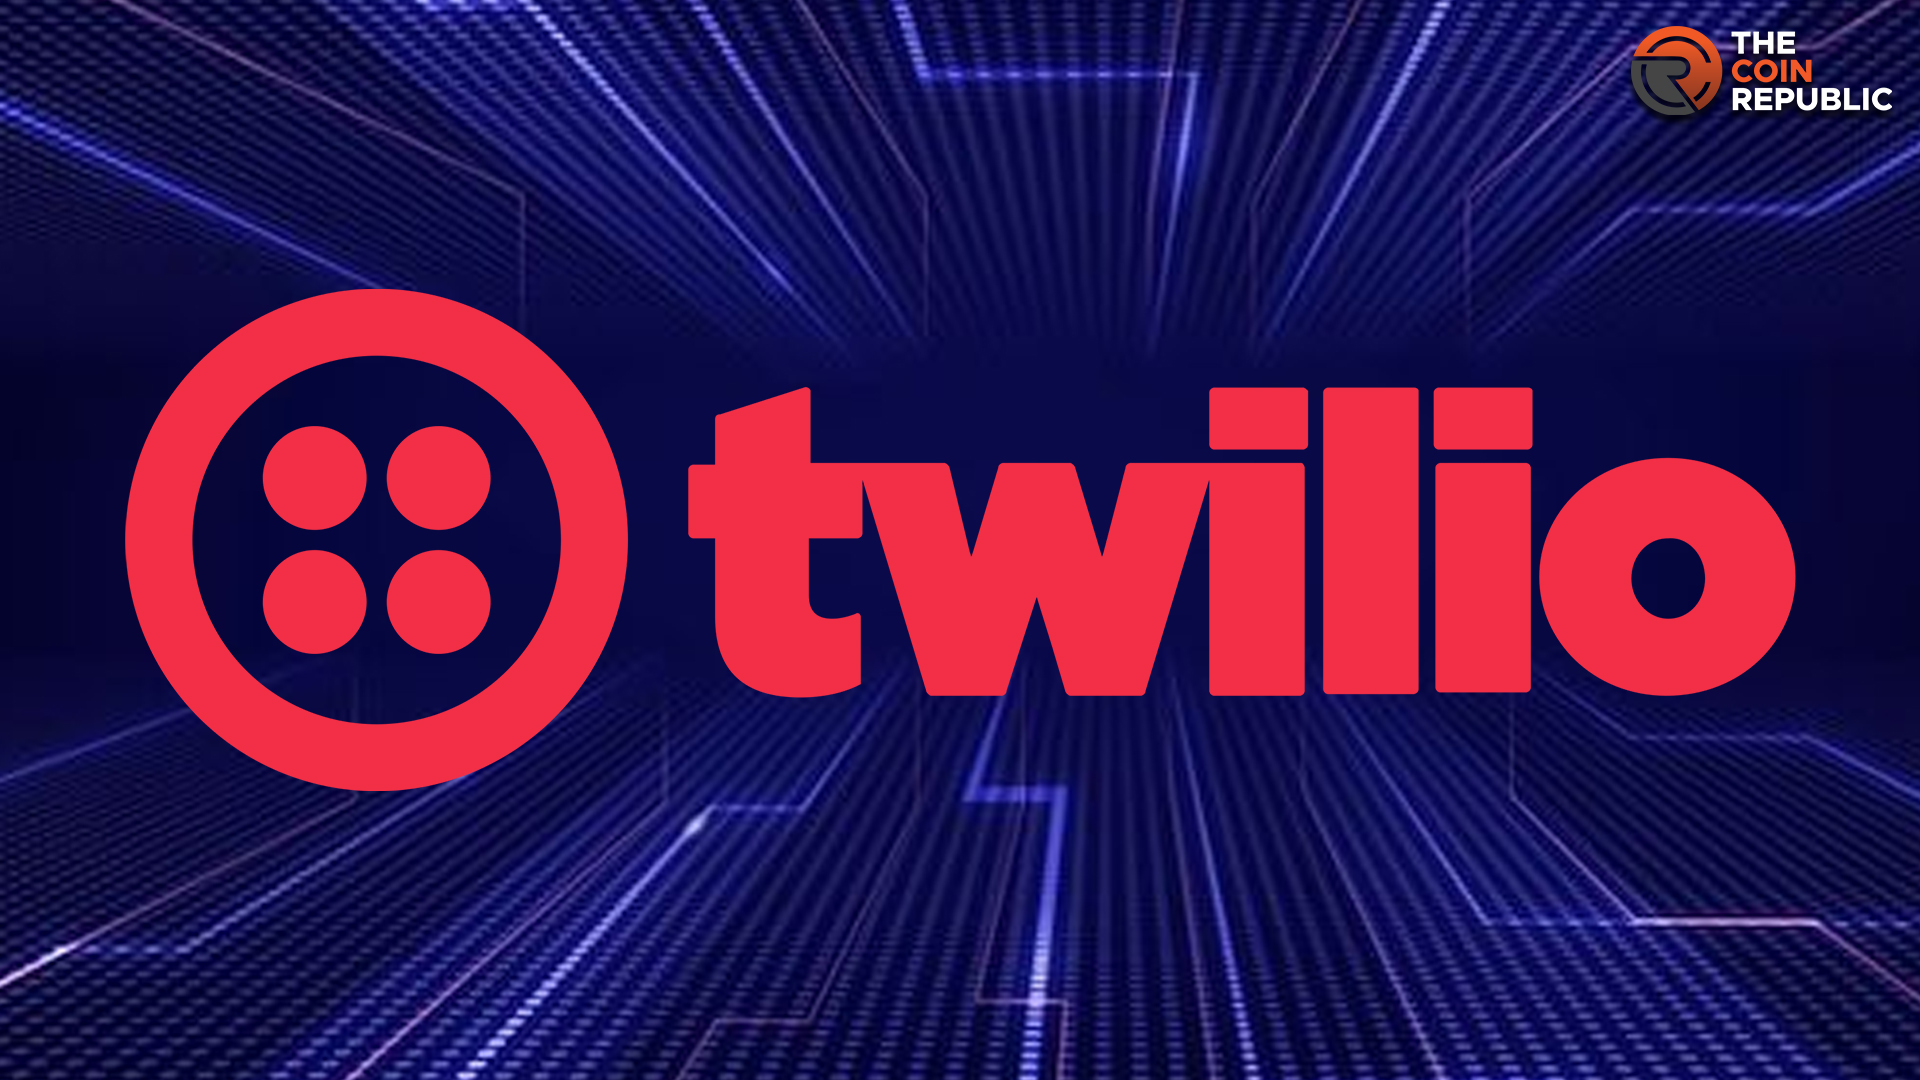 Twillo Stock Price Gaines 11% This Week: What To Expect On Monday?